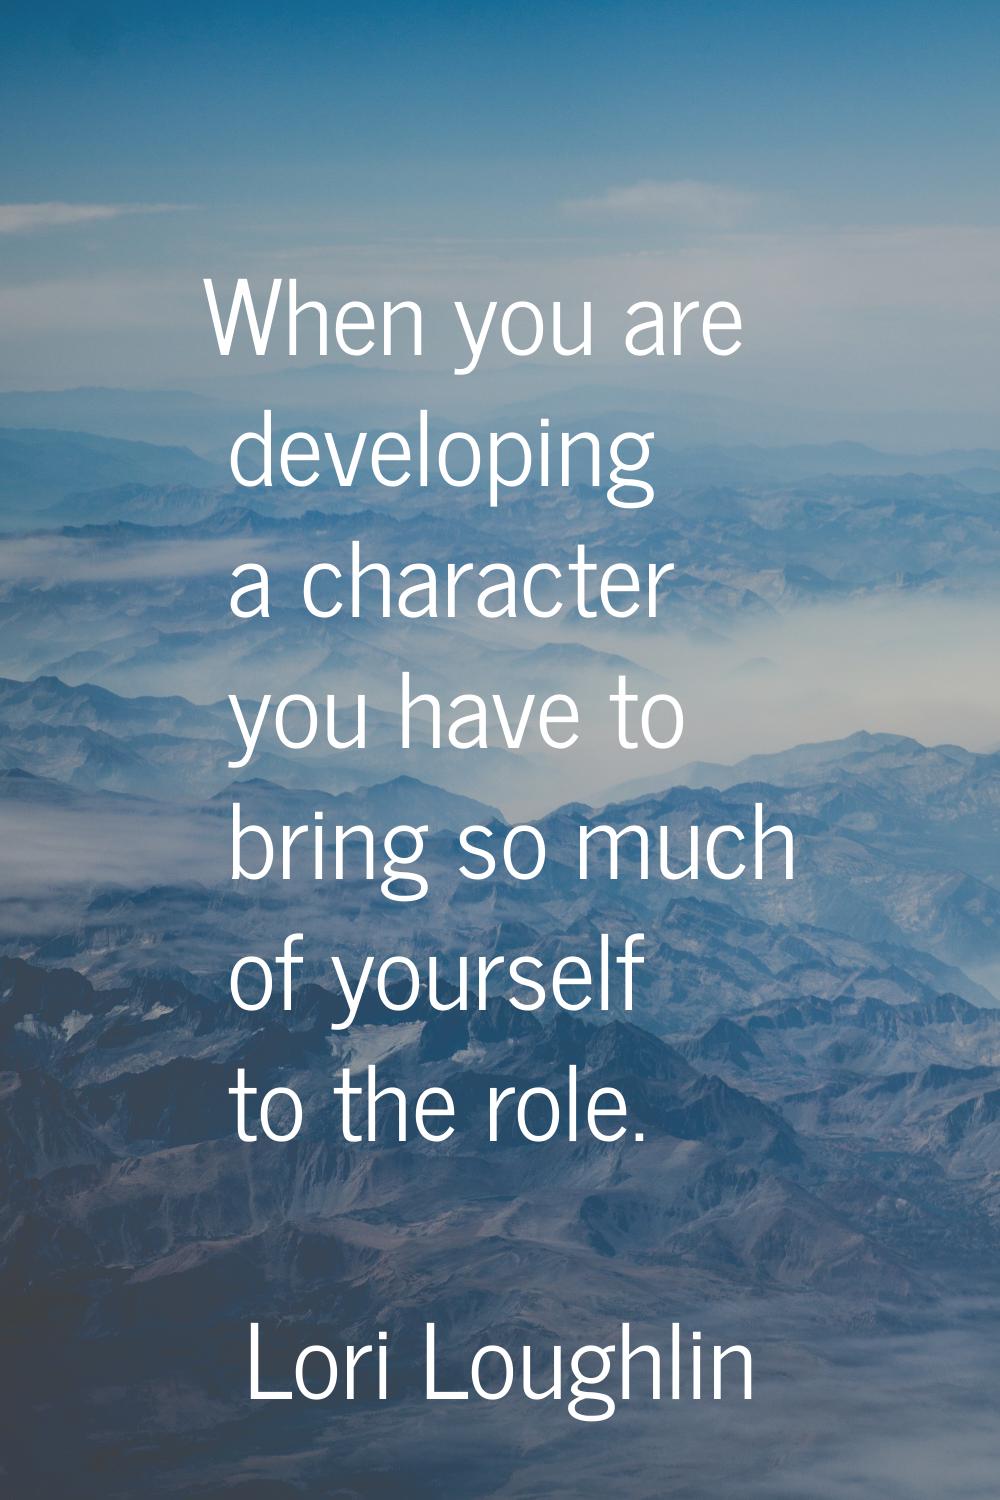 When you are developing a character you have to bring so much of yourself to the role.